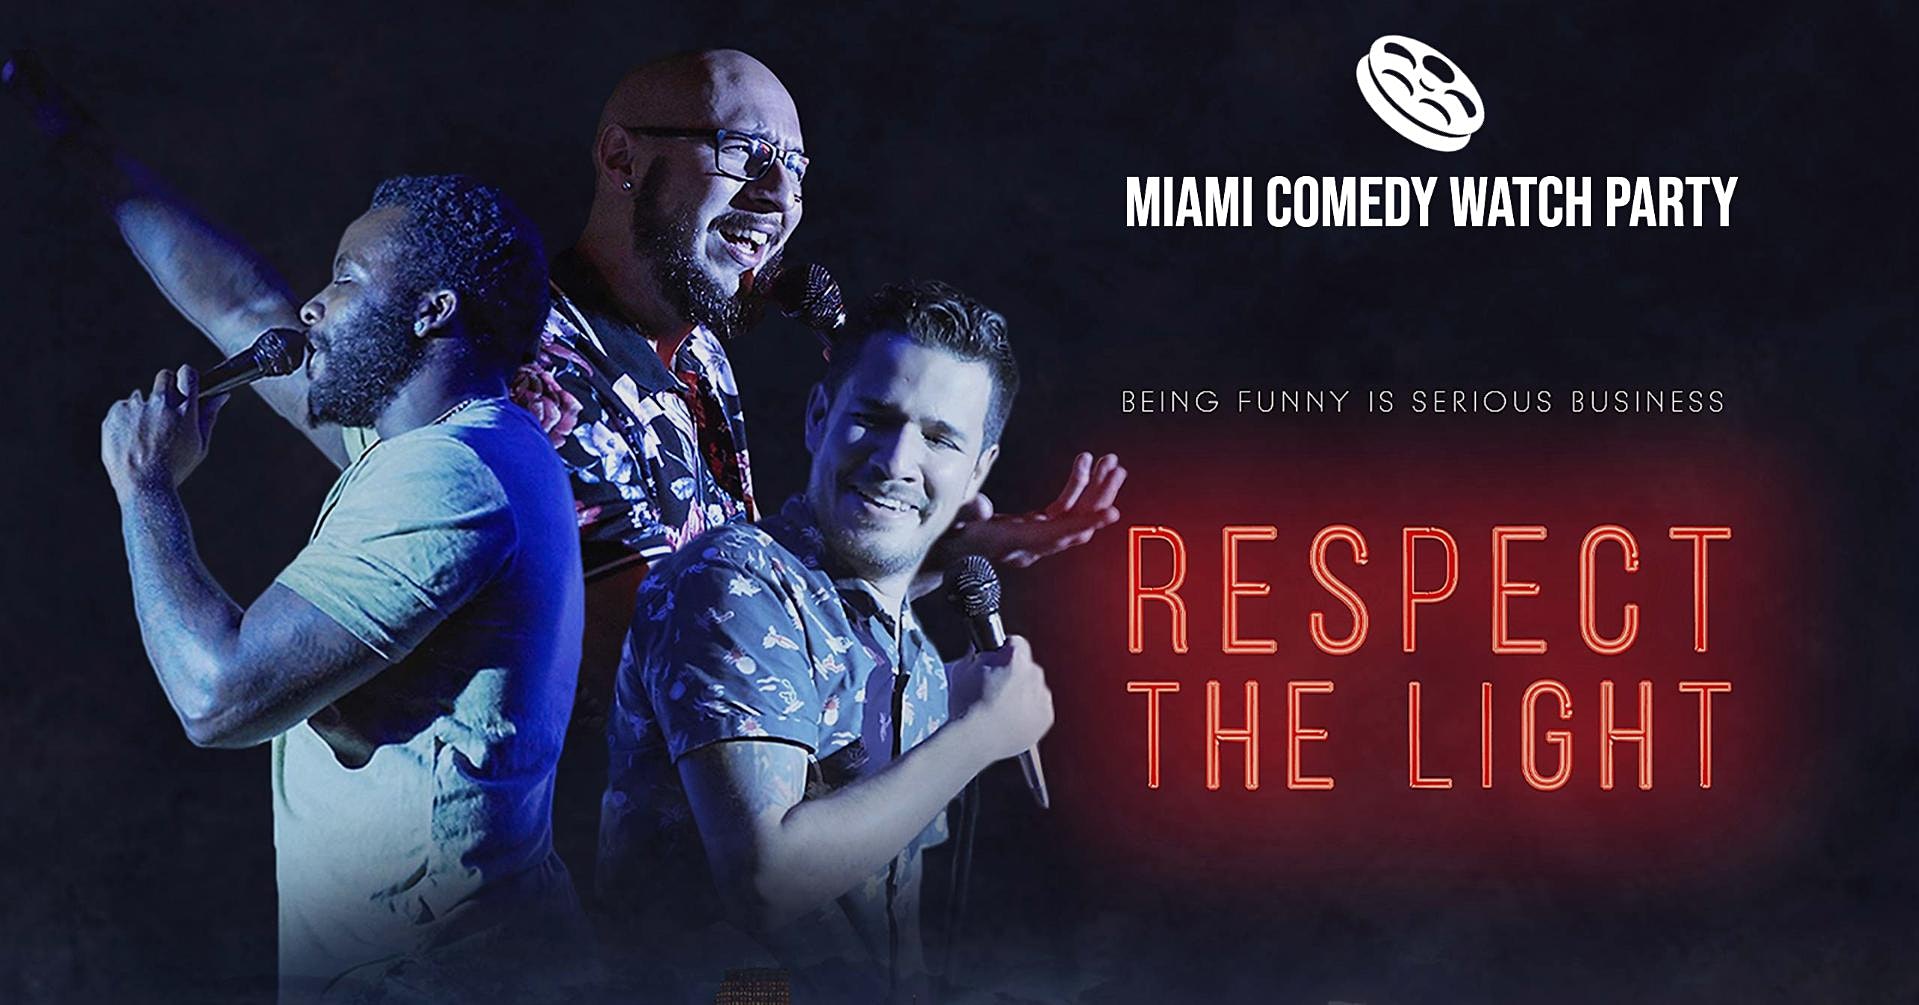 Miami Comedy Watch Party